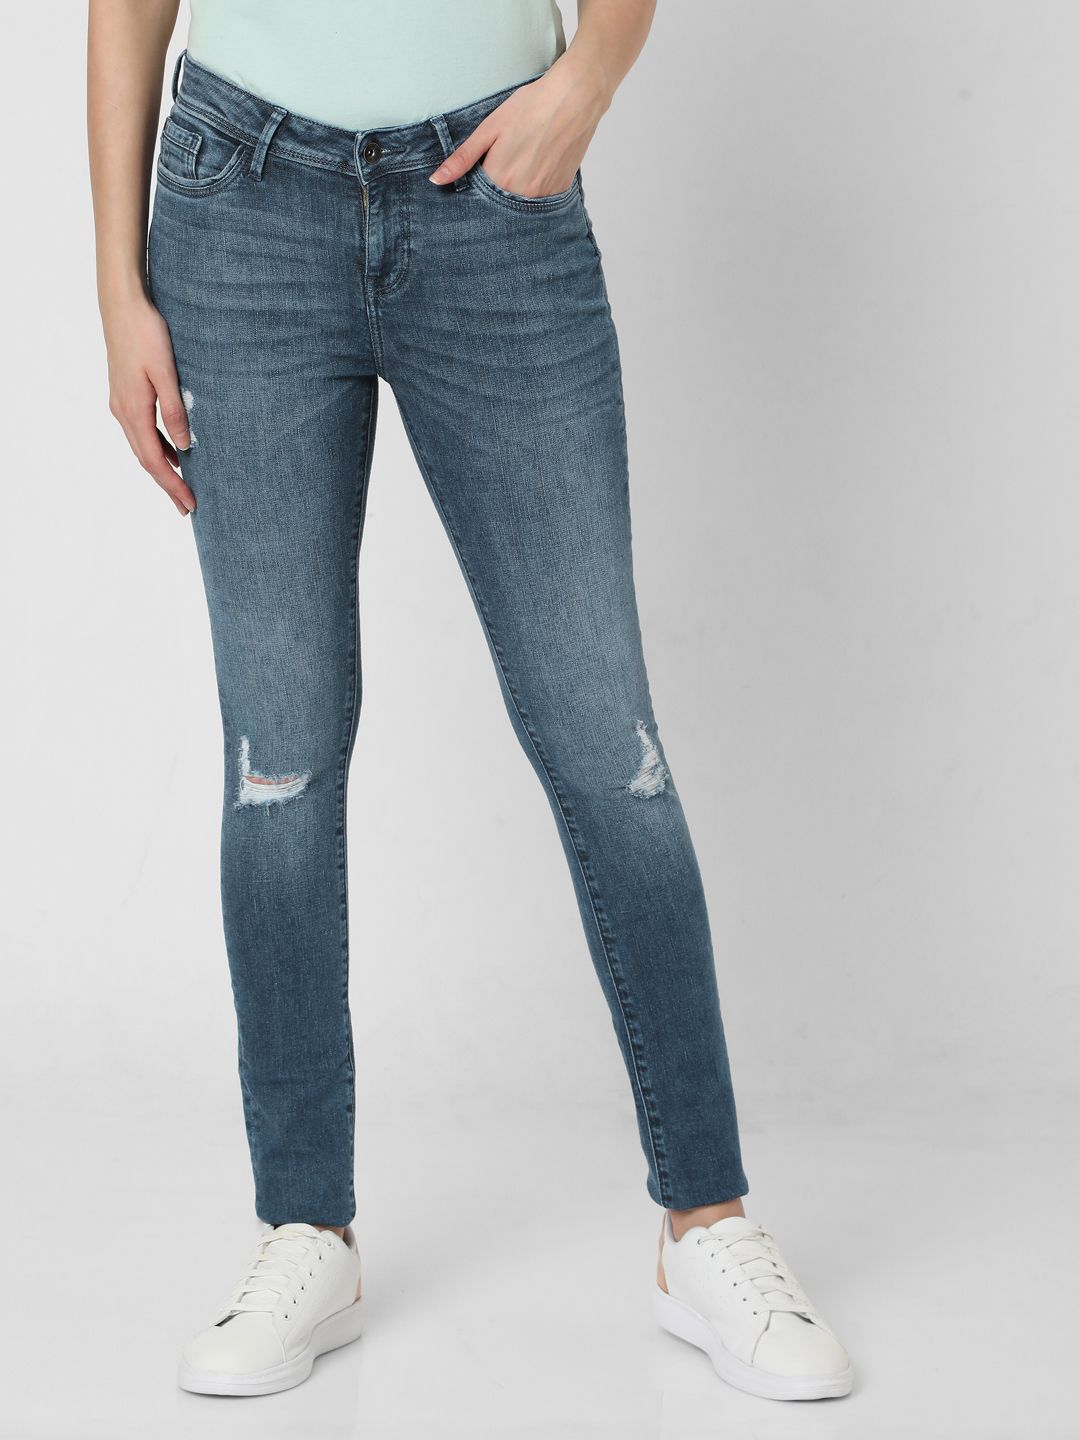 Vero Moda Women Blue Skinny Fit Mildly Distressed Stretchable Light Fade Jeans Price in India